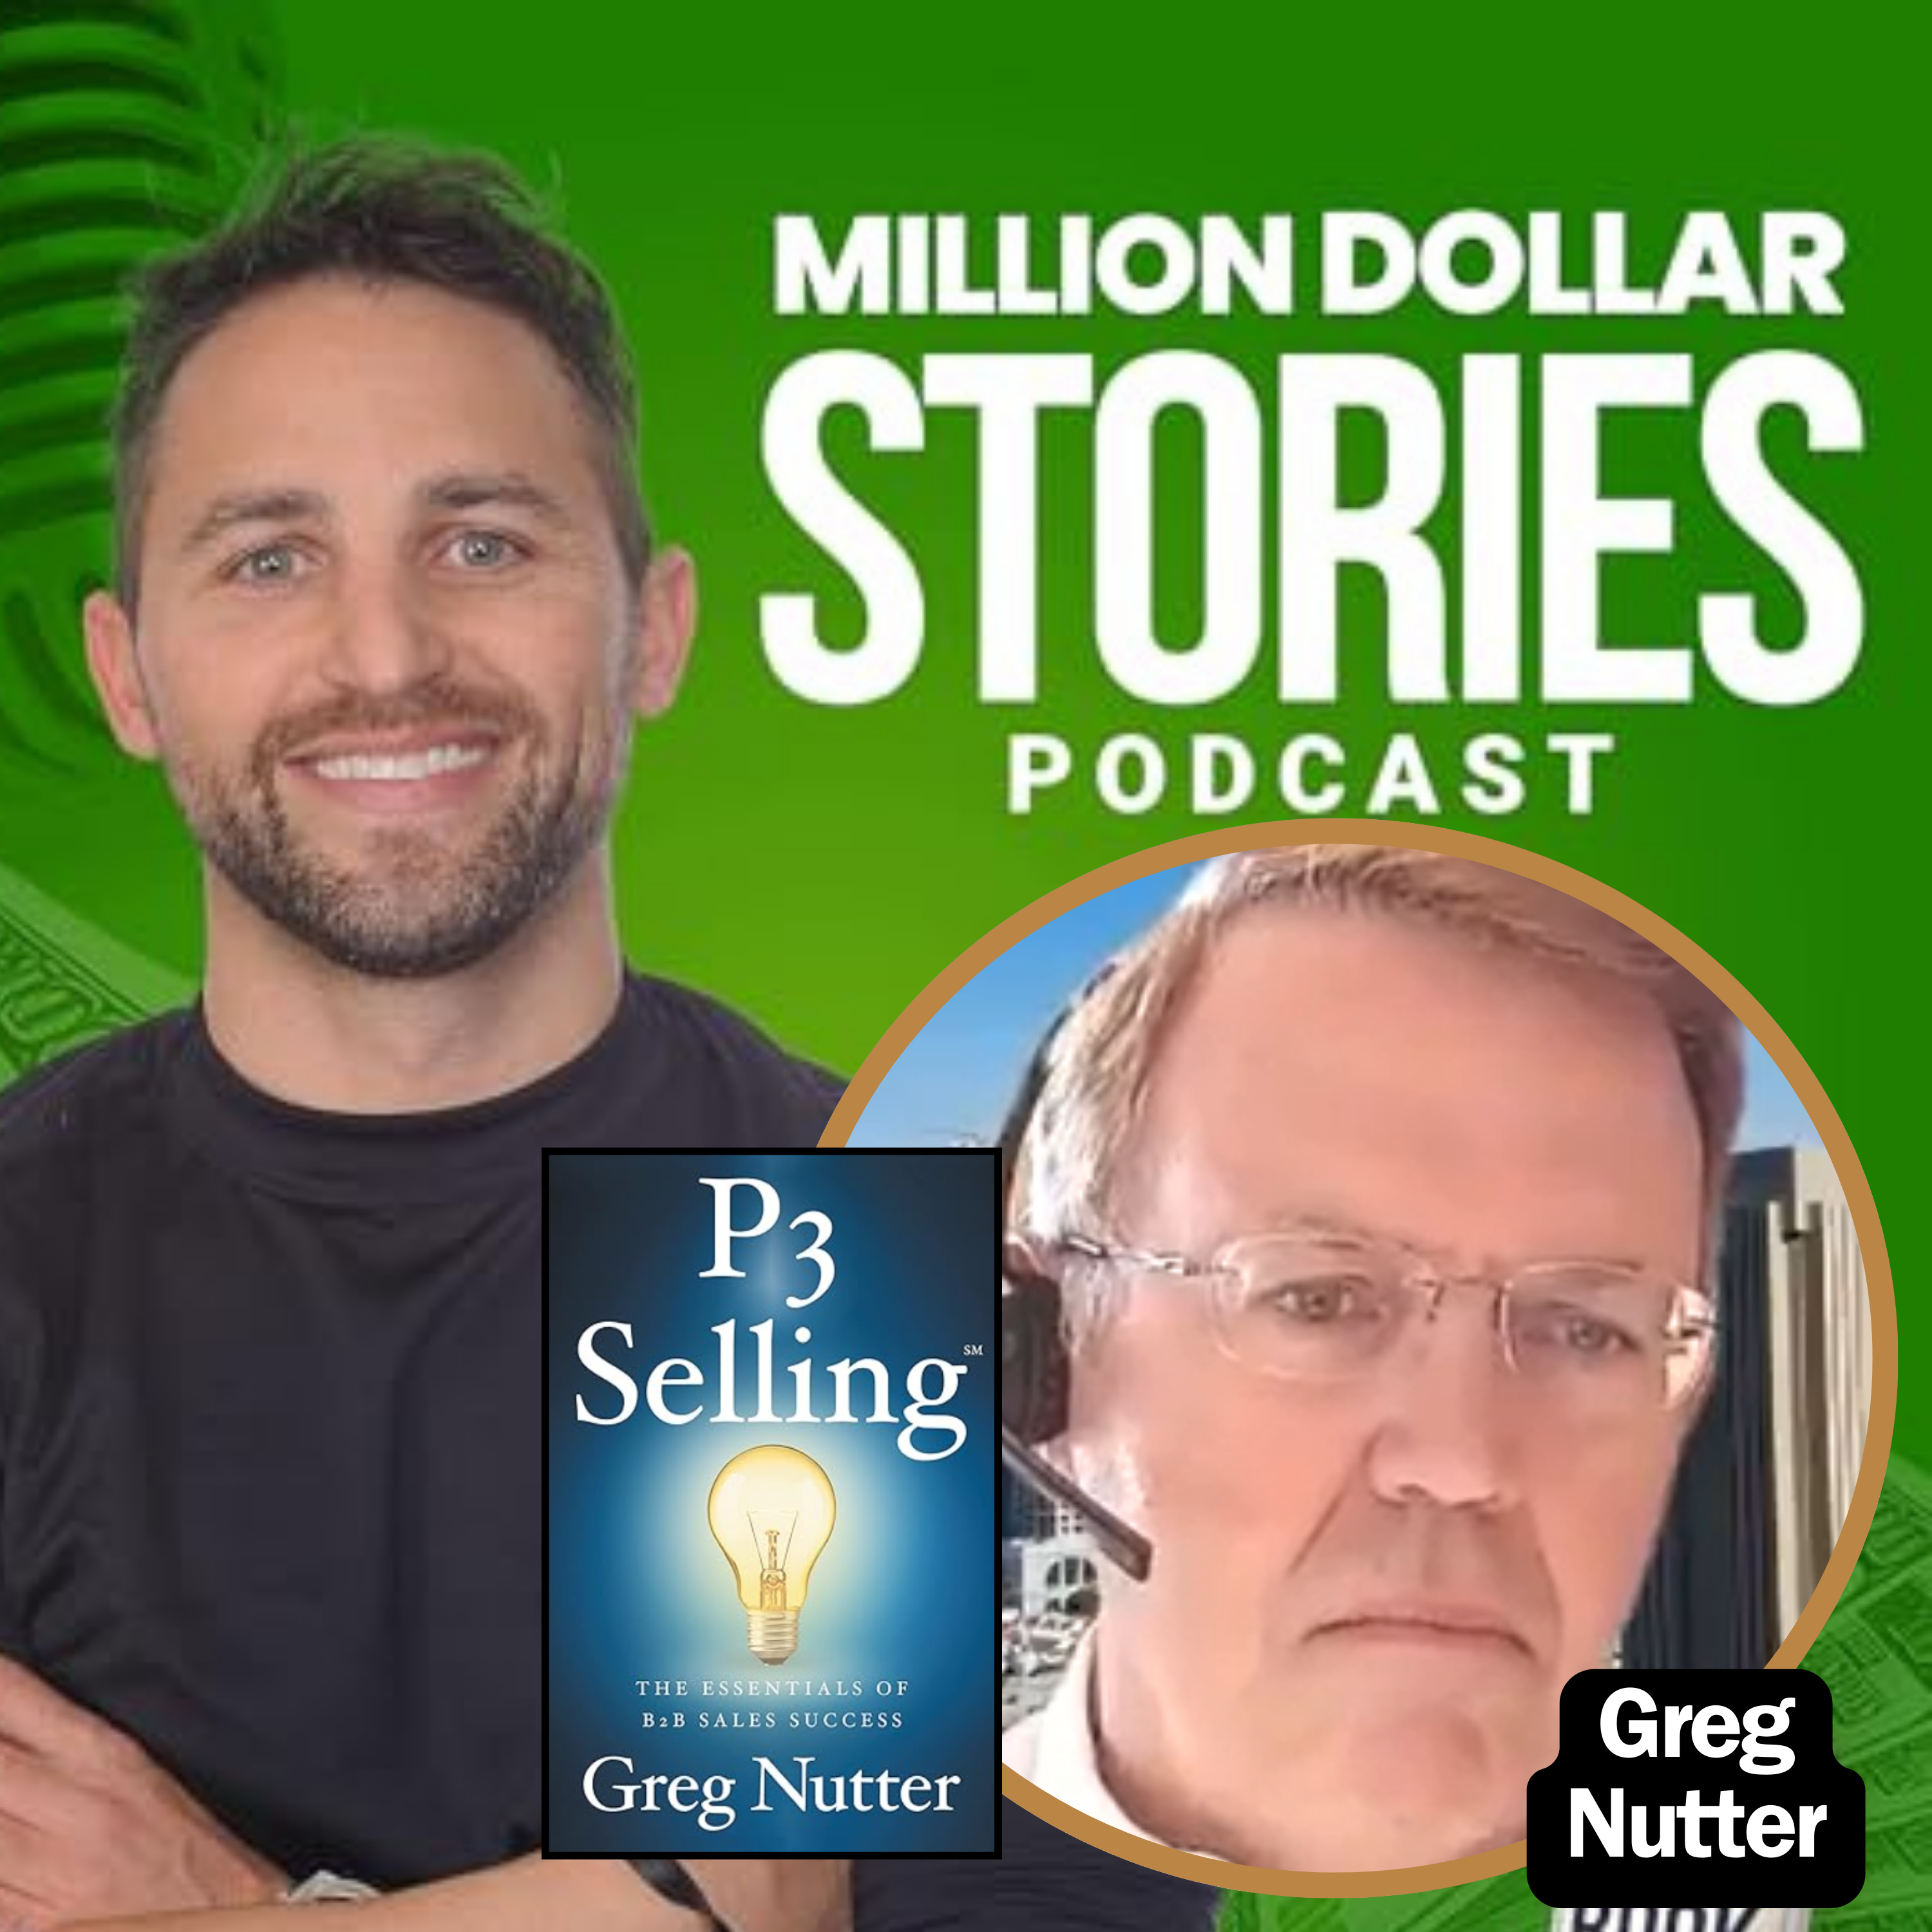 Greg Nutter – Author of “P3 Selling The Essentials of B2B Sales Success”